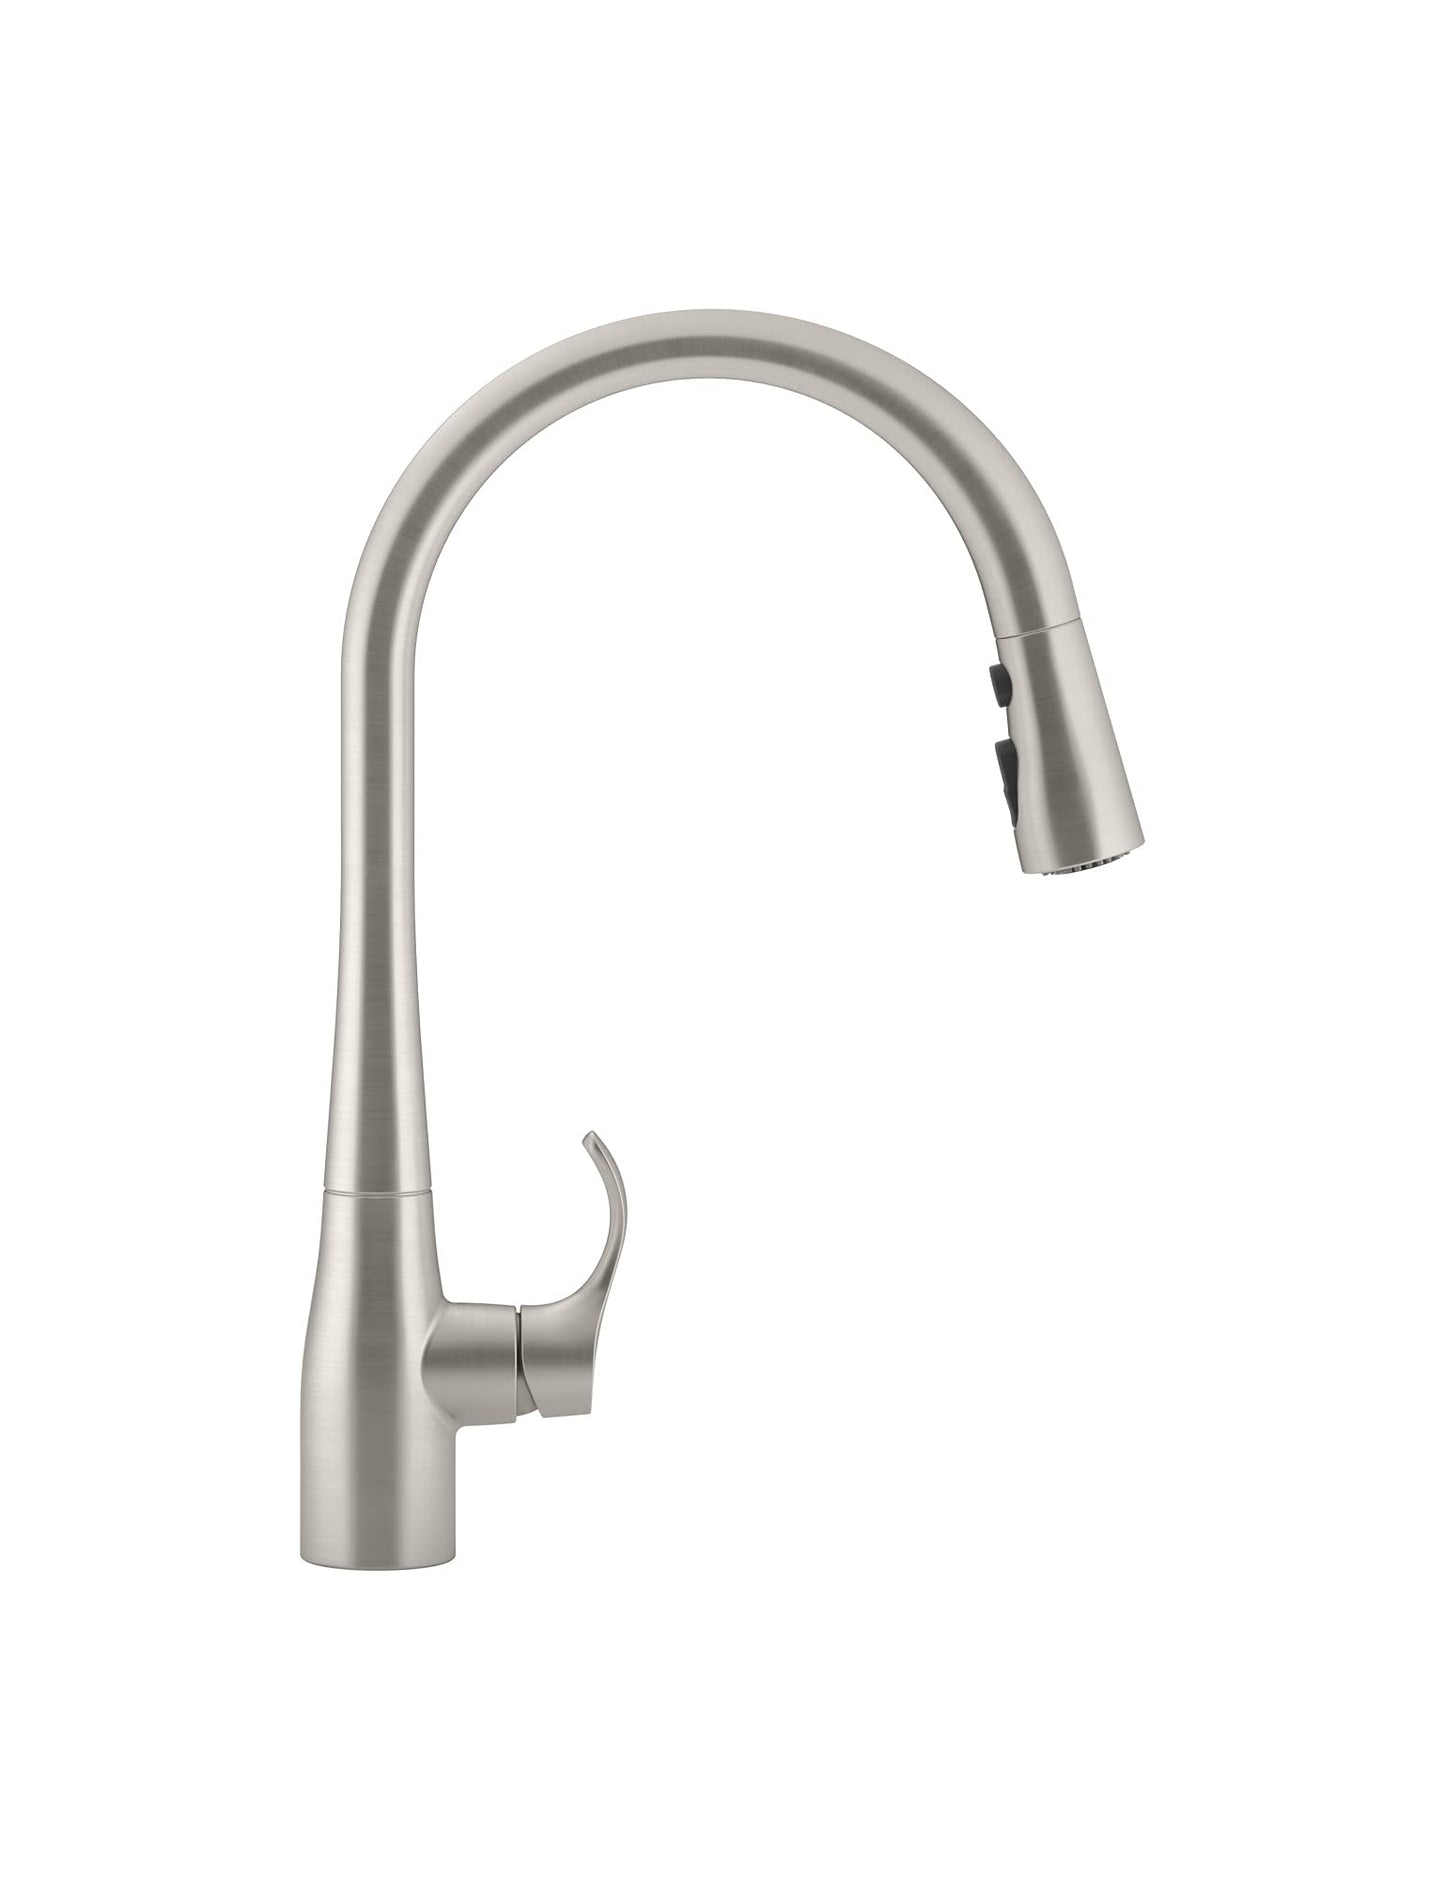 KOHLER 596-VS Simplice Pull Down Kitchen Faucet, 3-Spray Faucet, Kitchen Sink Faucet with Pull Down Sprayer, Vibrant Stainless, High Arch - Very Good